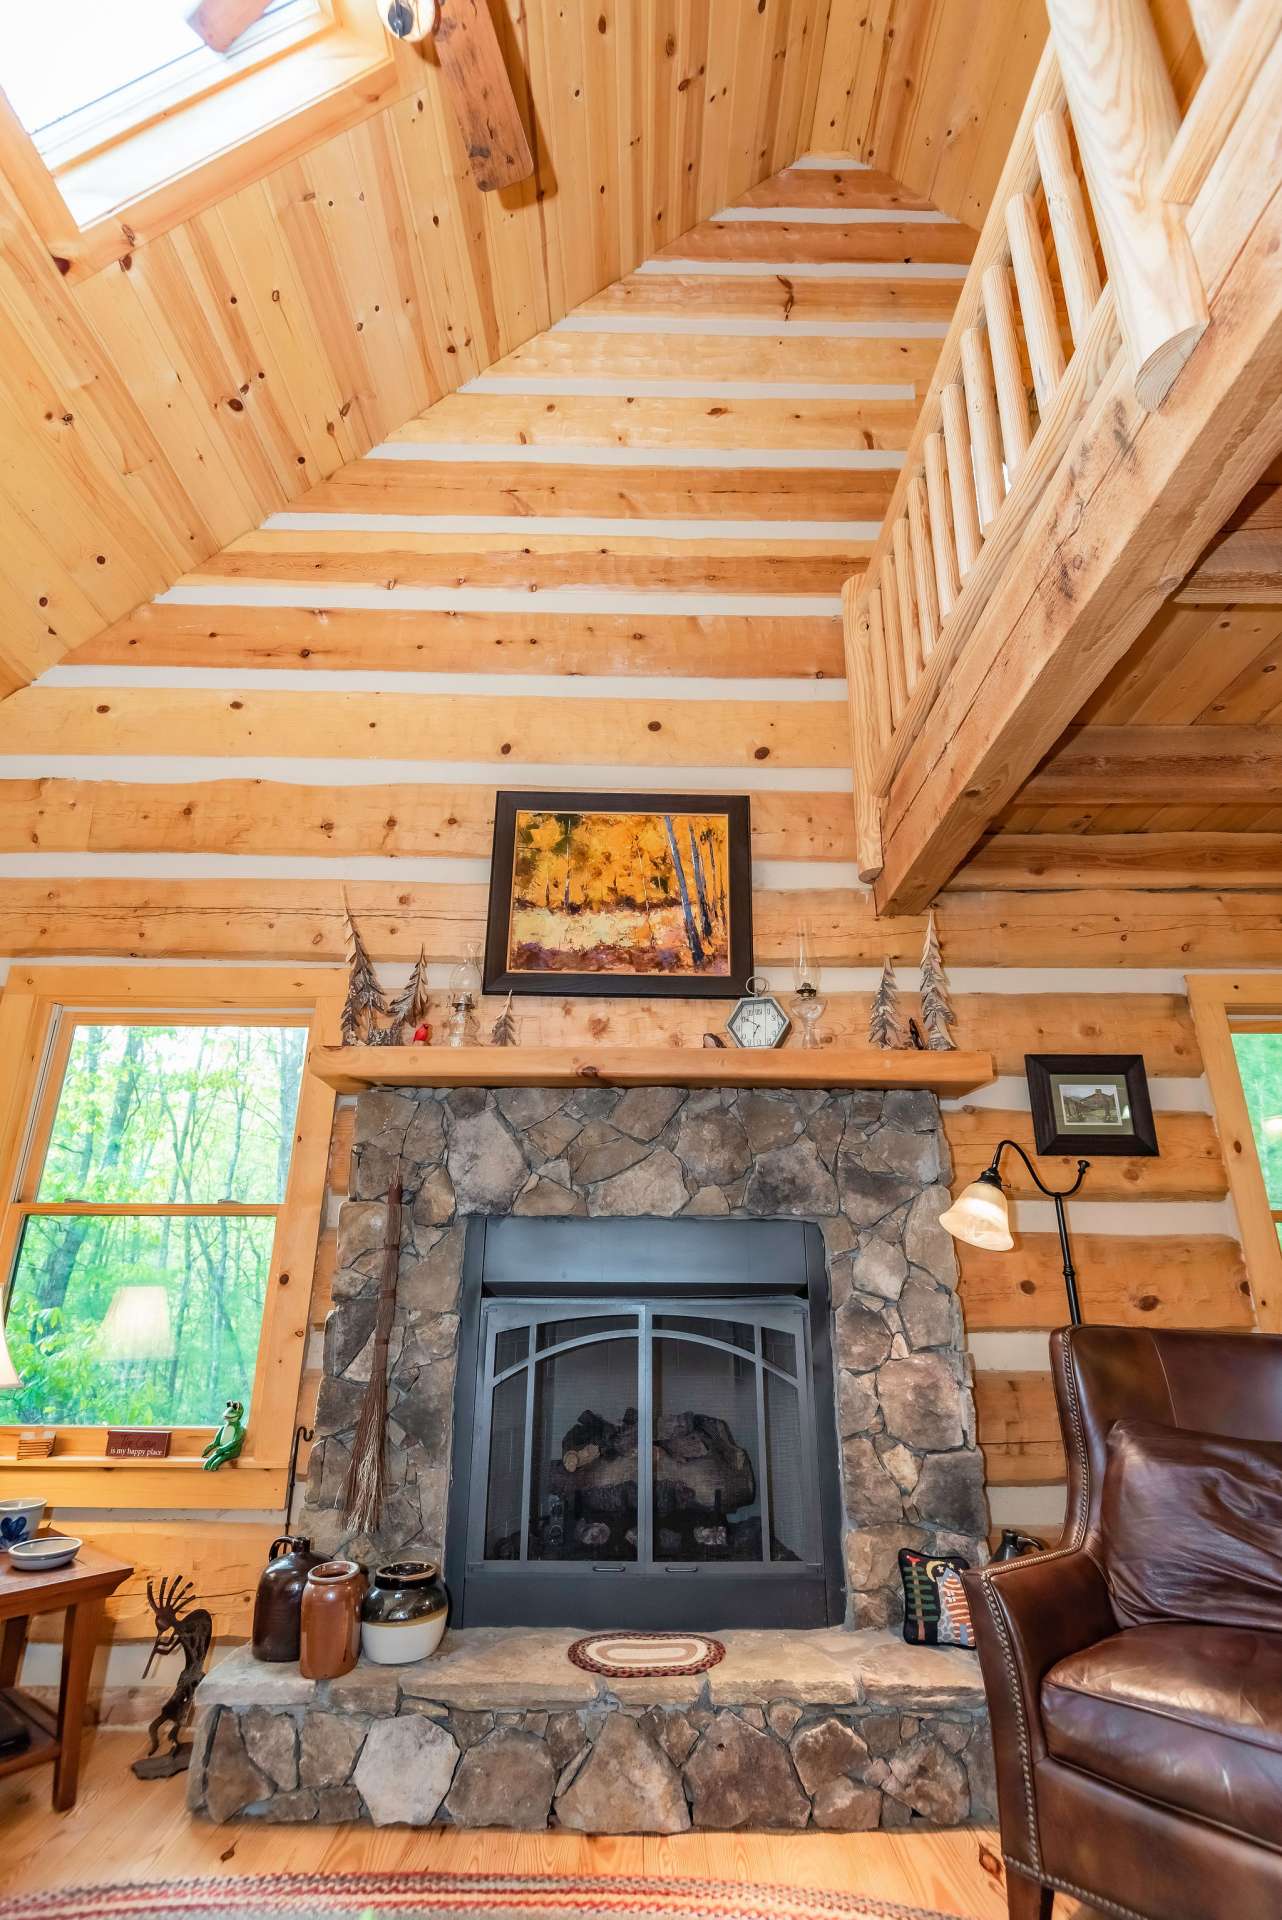 The fireplace is the focal point of the living area.  Notice the skylight allowing more natural light inside the cabin.